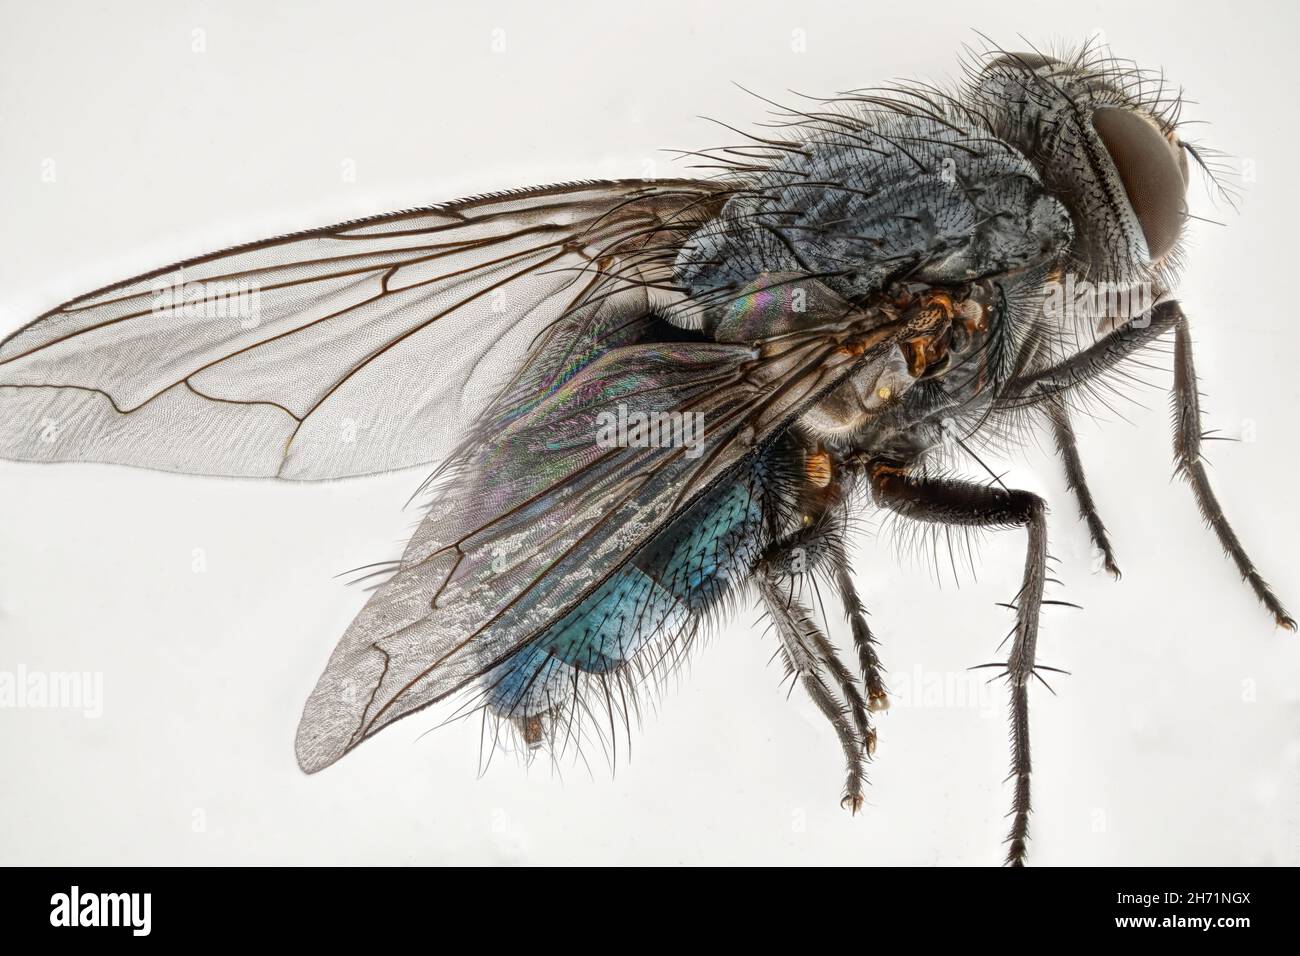 A fly, magnification 3.3 times. Stock Photo